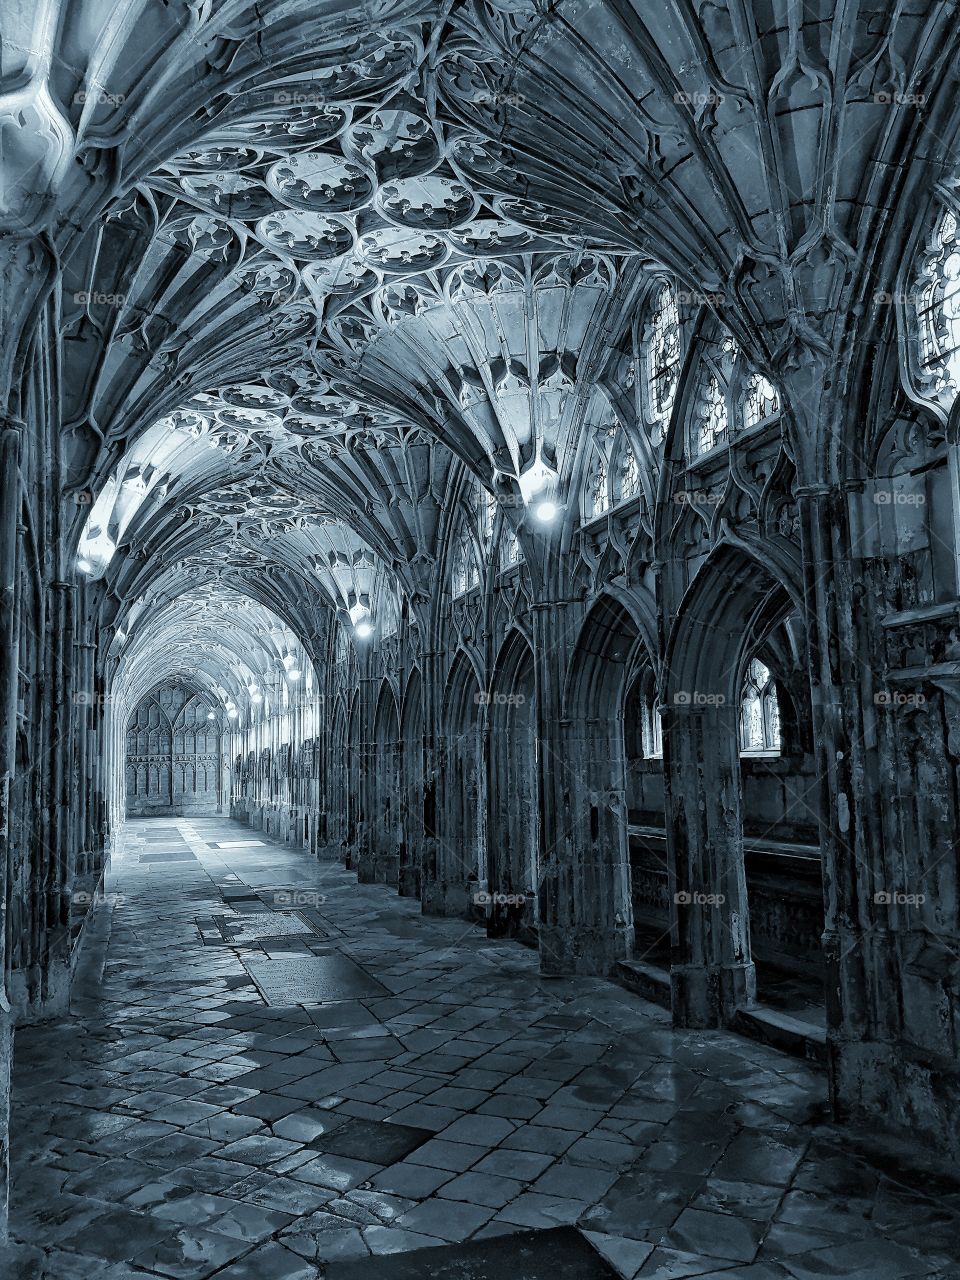 Gloucester cathedral corridors as seen in Harry Potter